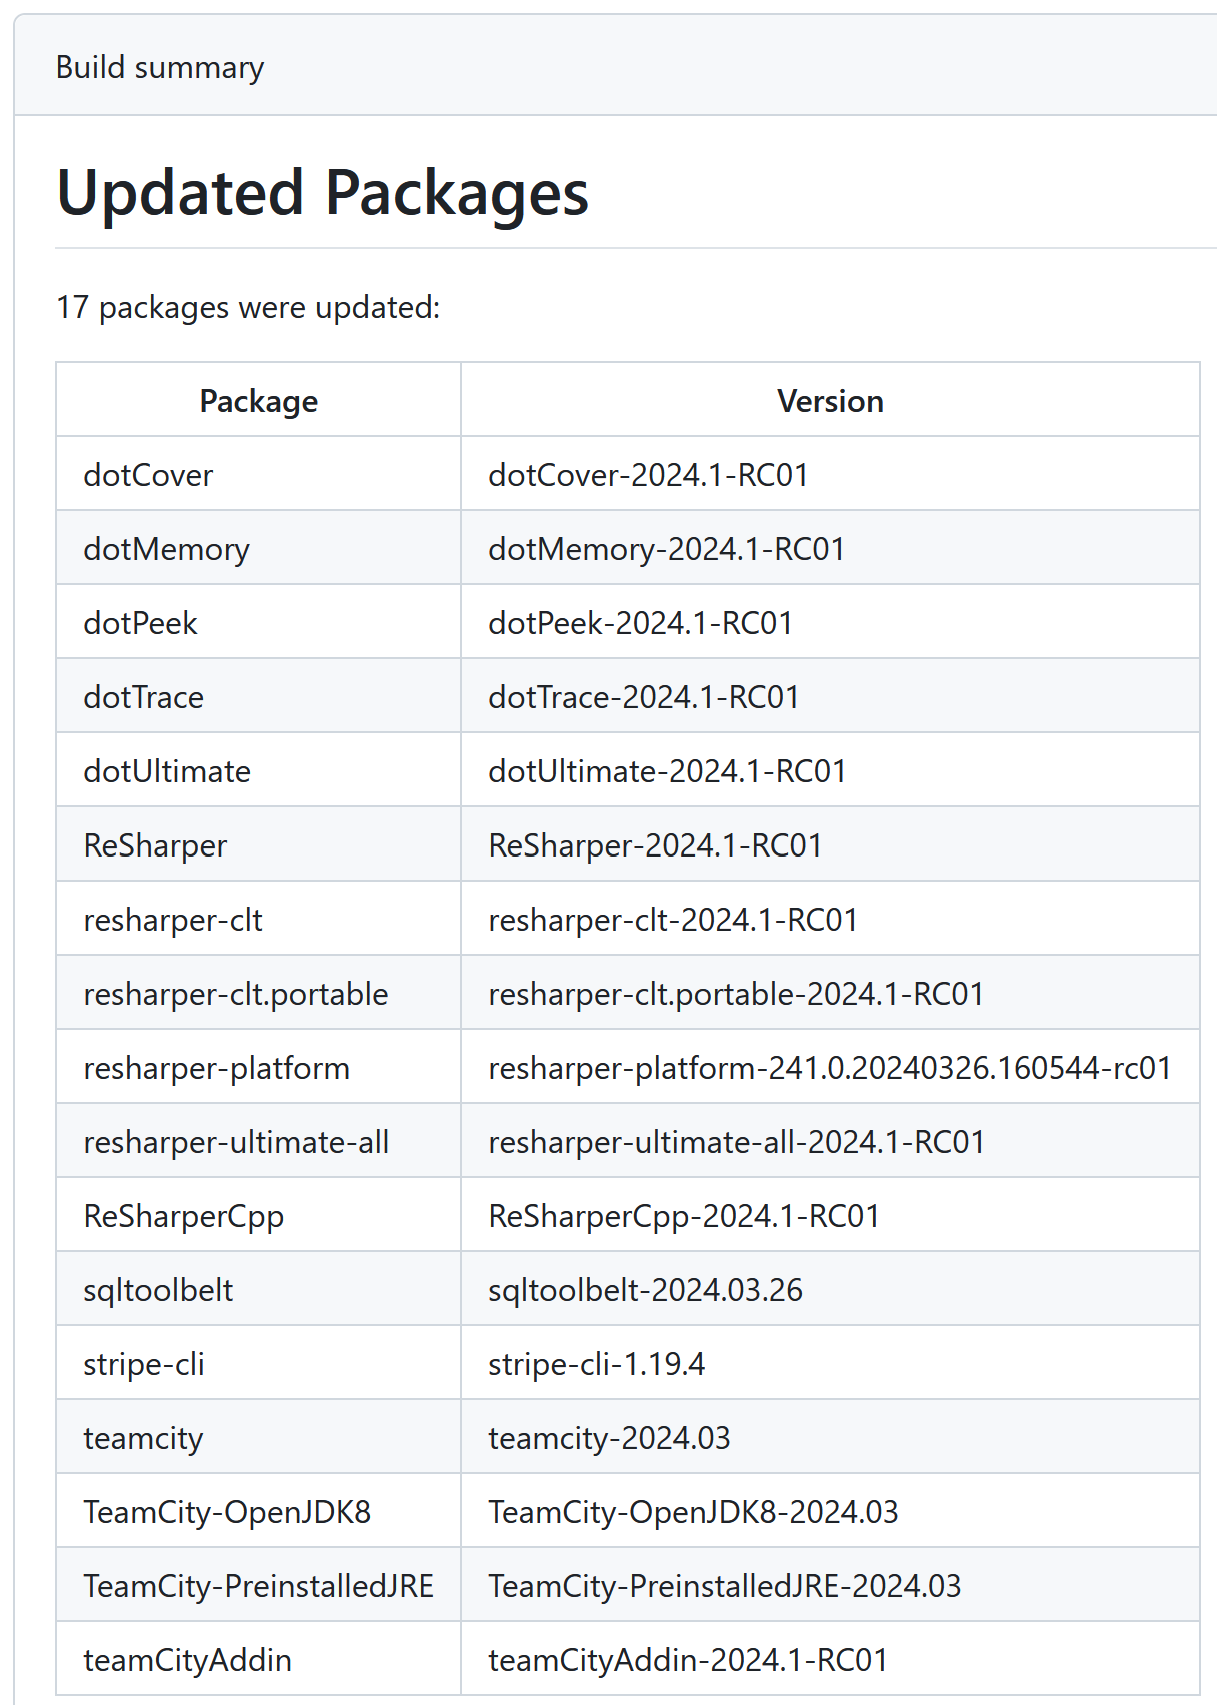 Screenshot of GitHub Actions build summary, showing 17 packages updated and a table with the package names and versions